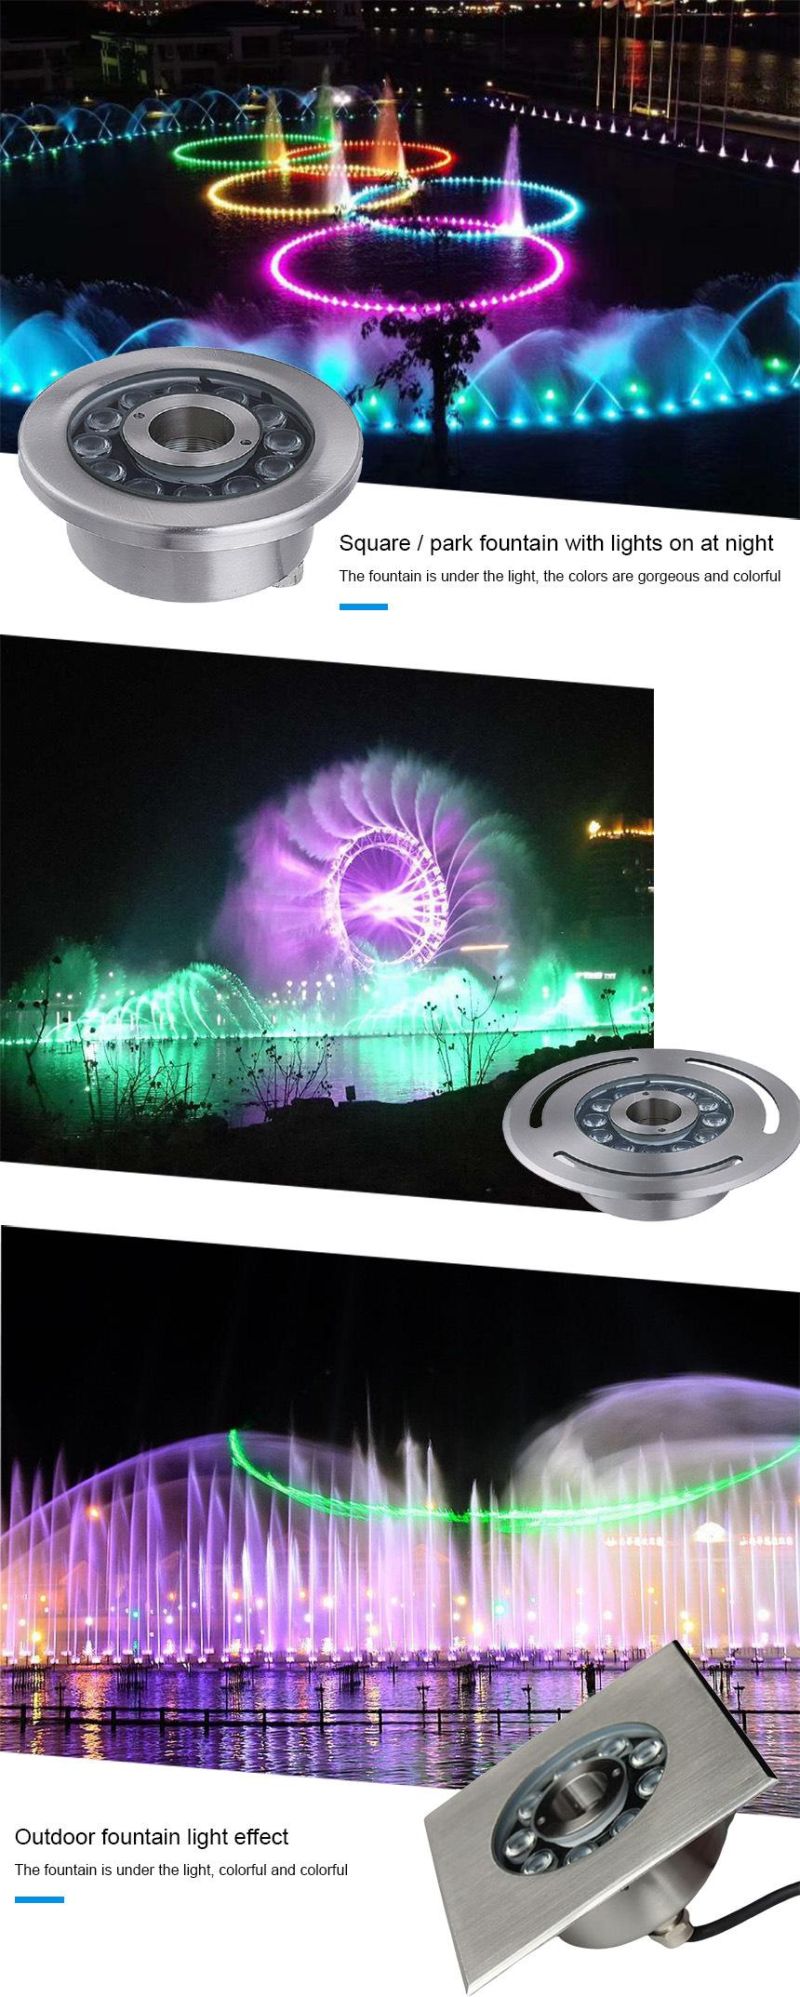 6*3W RGB 4 Wires External Control Outdoor Garden 24V LED Underwater Pond Fontain Nozzle Jet Ring Lights